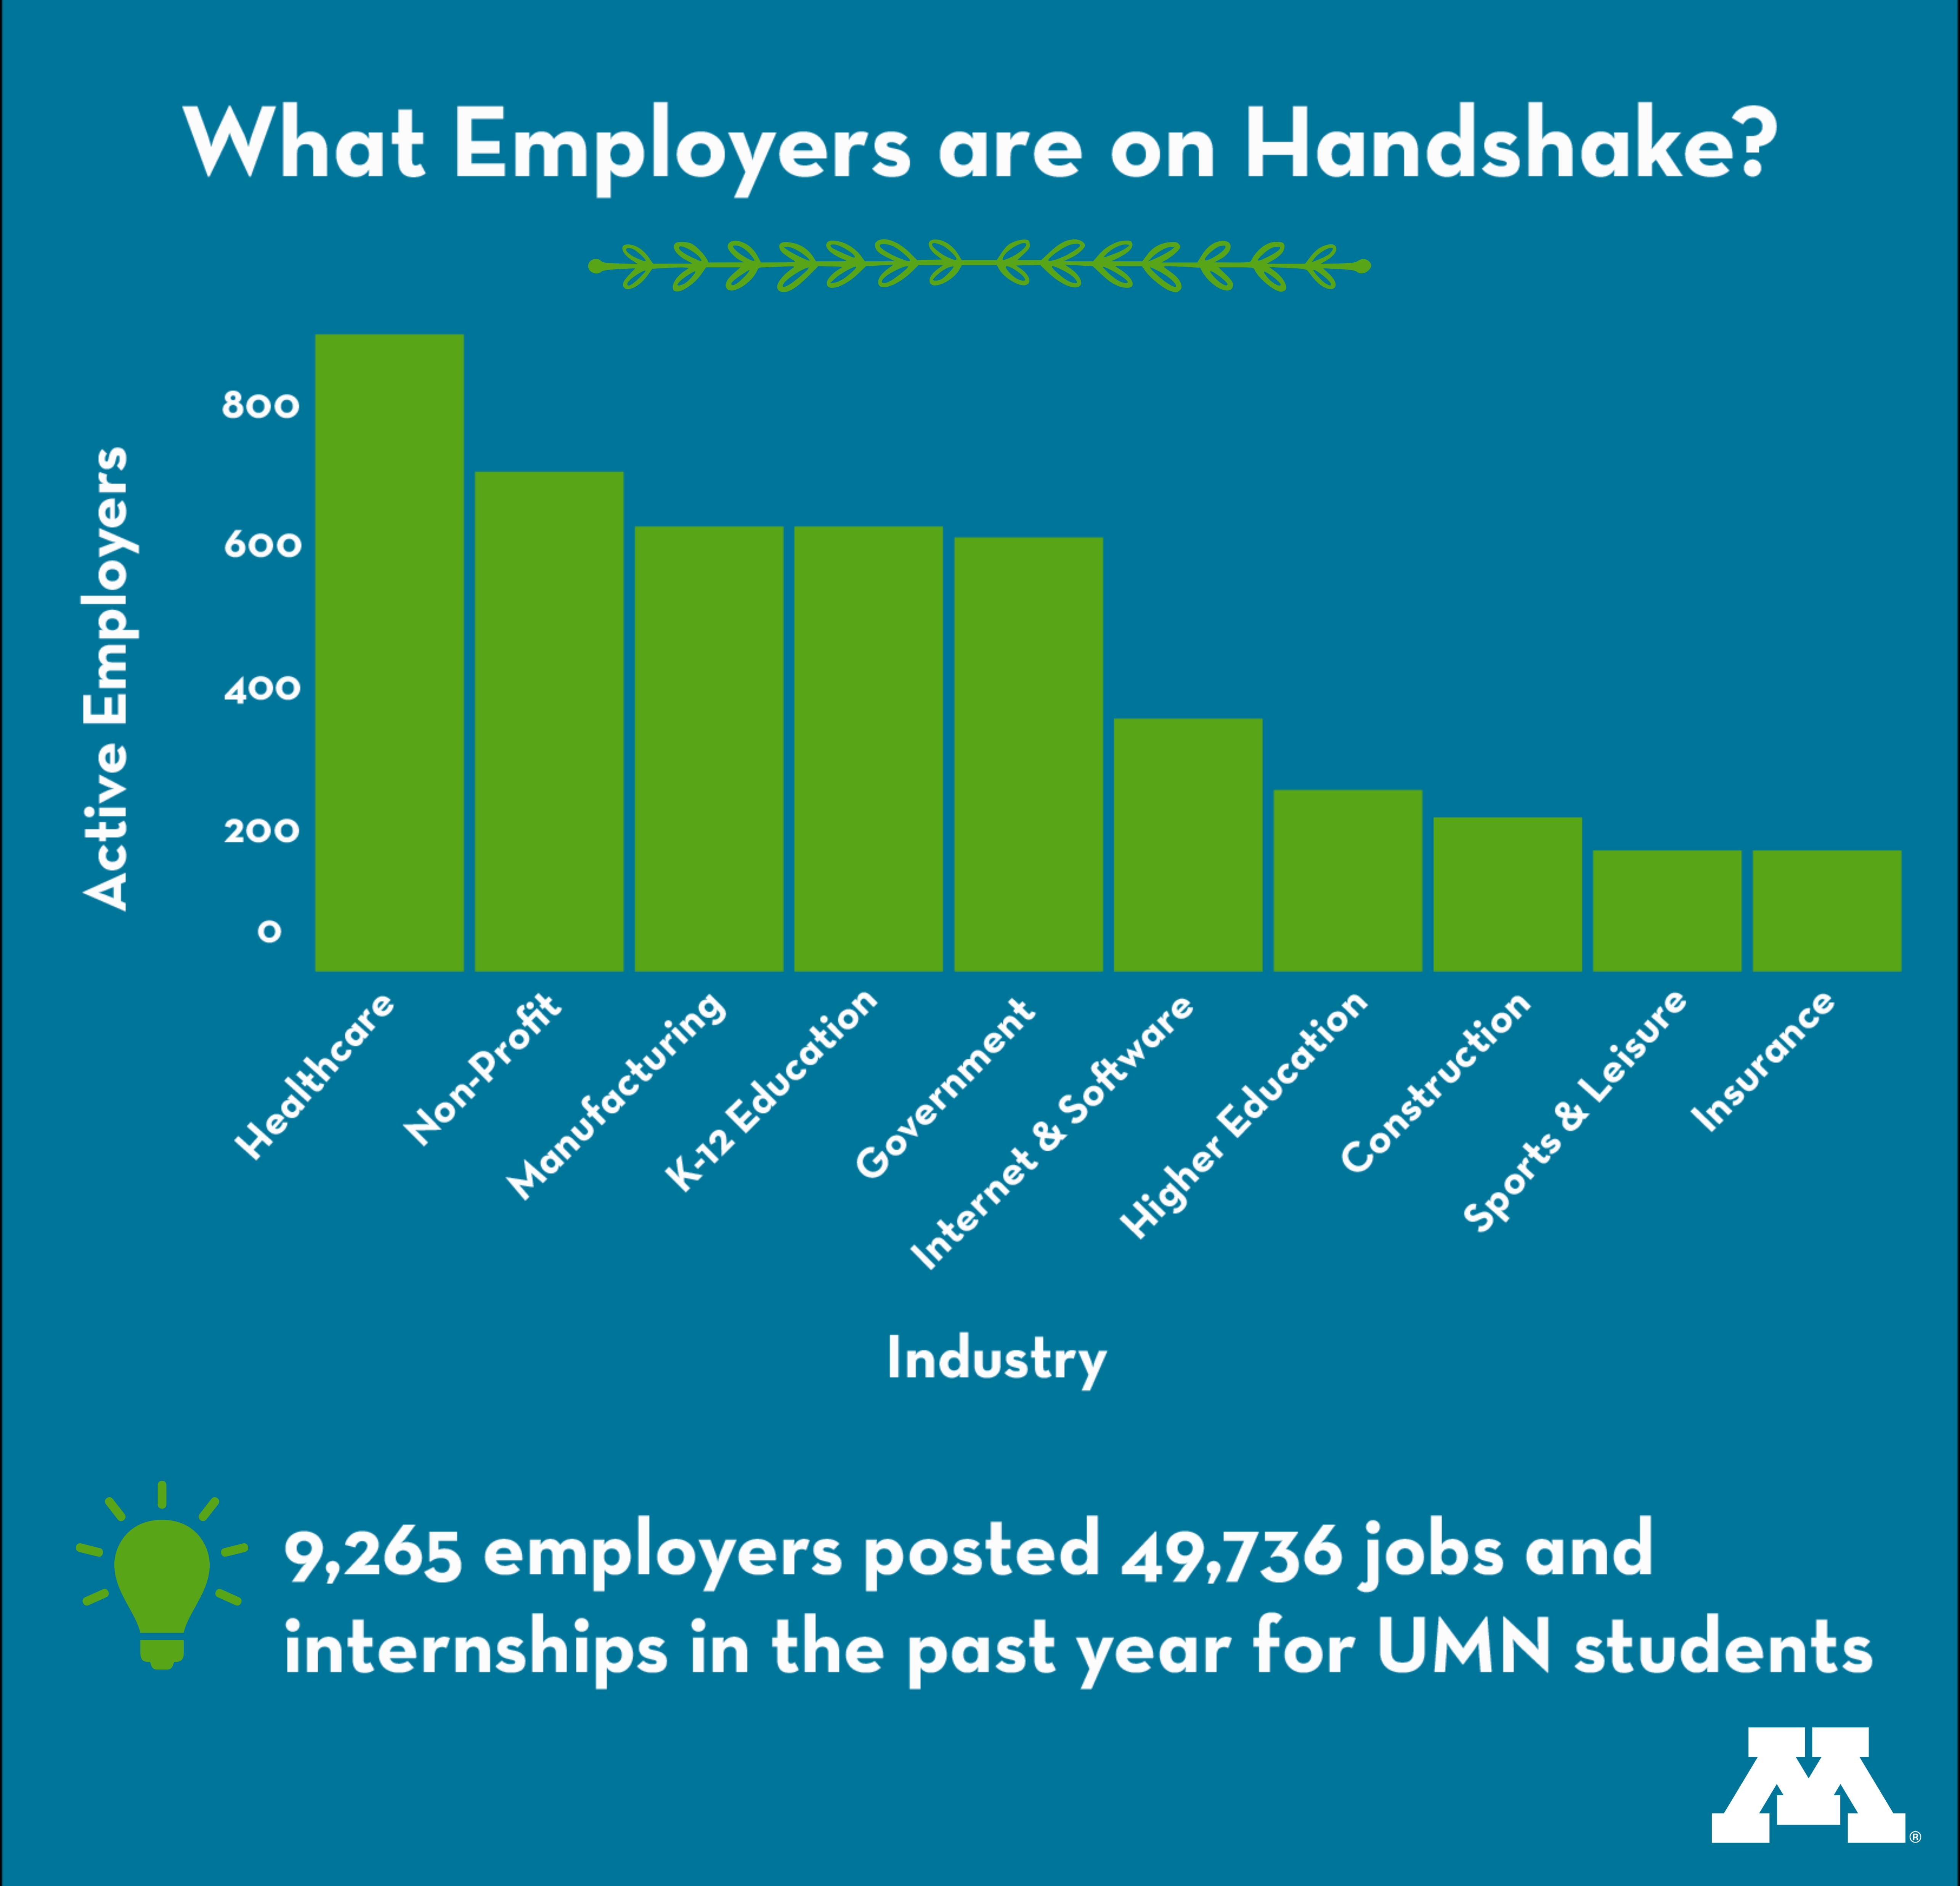 Bar chart of how many active employers are in the top ten industries on Handshake.